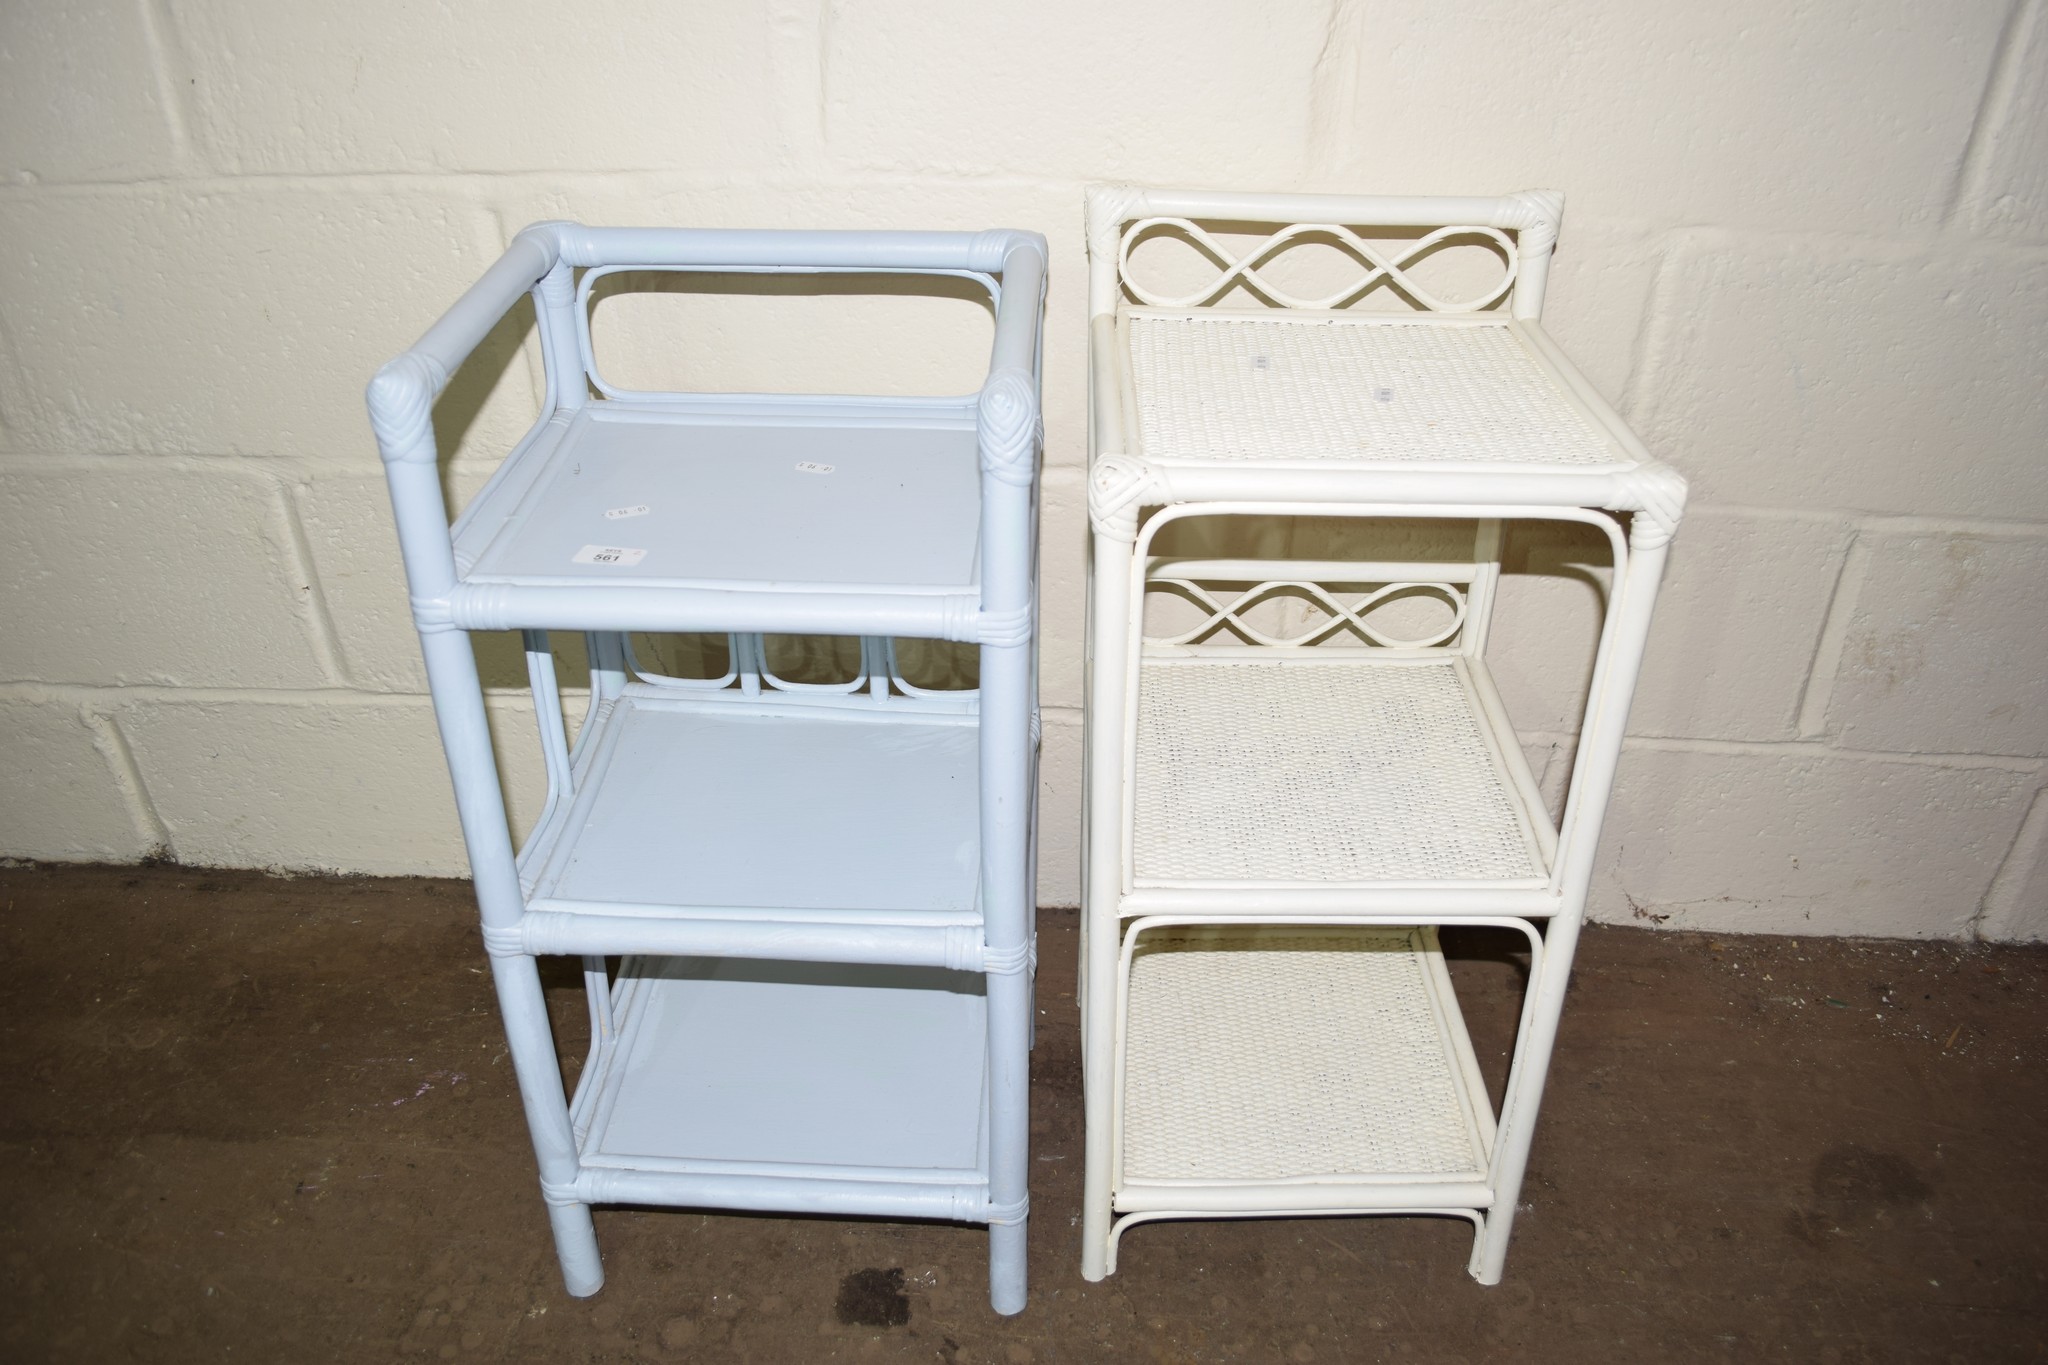 TWO SMALL PAINTED BATHROOM UNITS EACH WIDTH APPROX 33CM